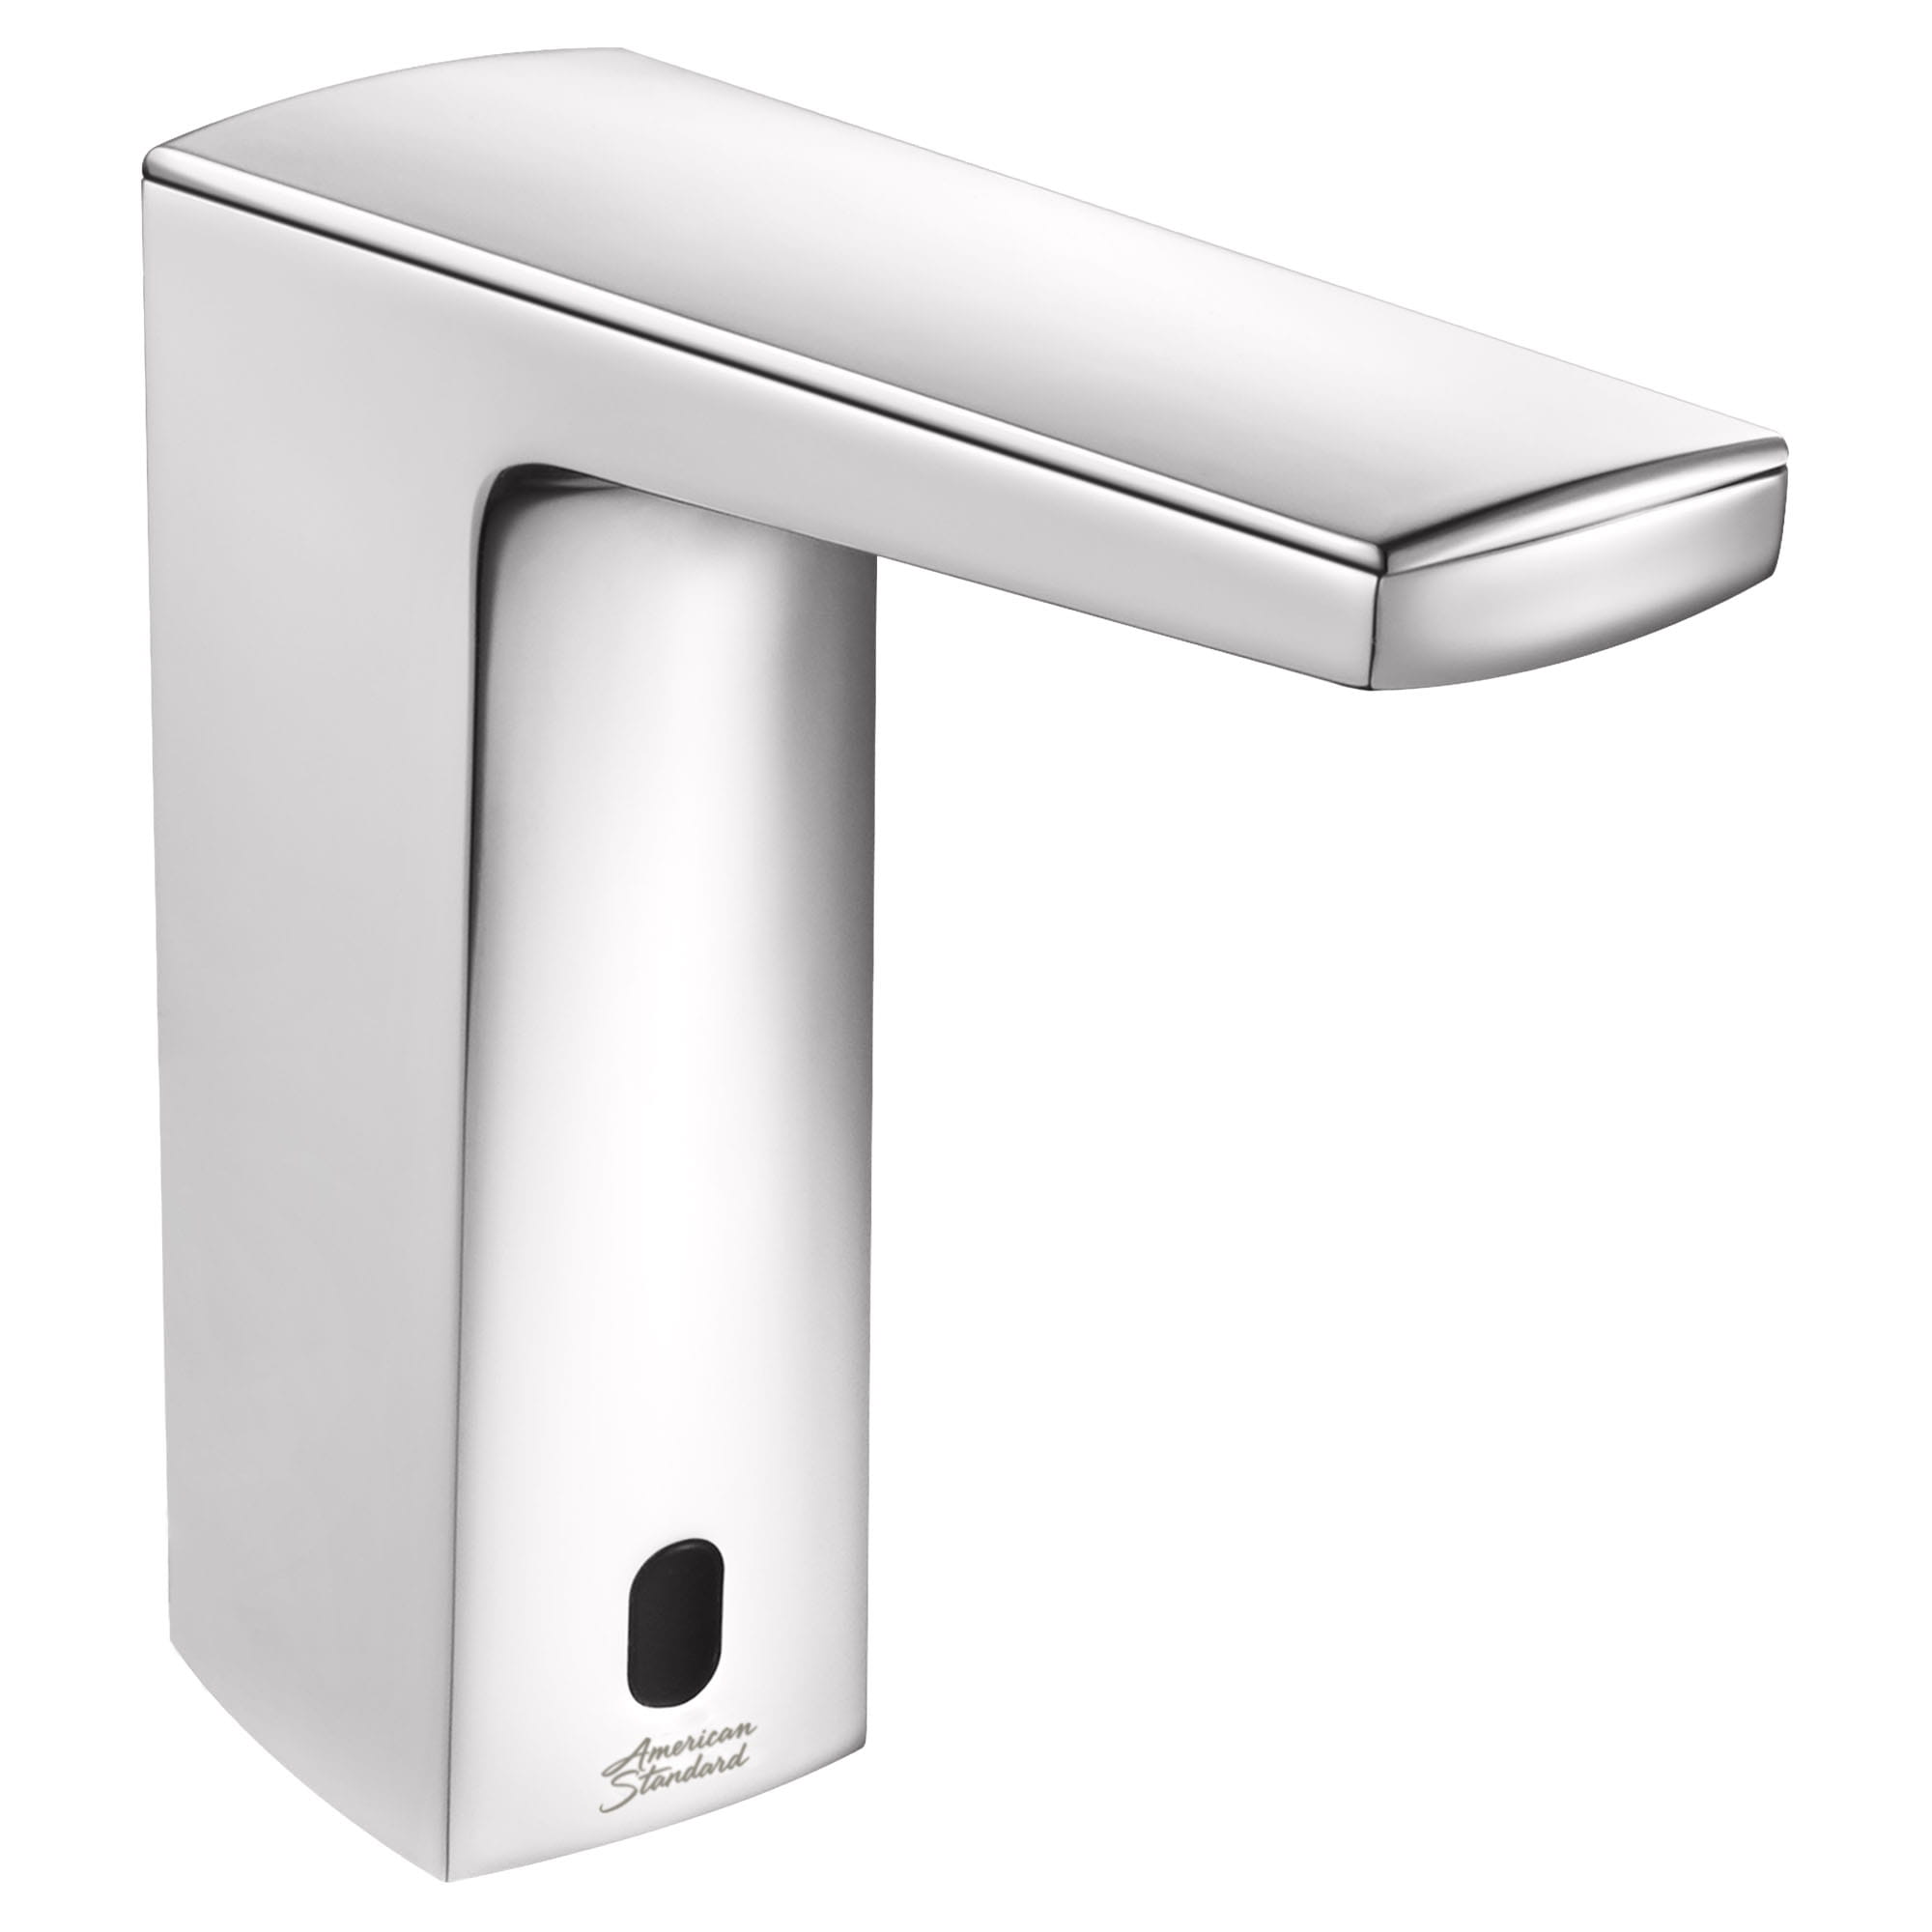 Paradigm® Selectronic® Touchless Faucet, Battery-Powered With Above-Deck Mixing, 1.5 gpm/5.7 Lpm